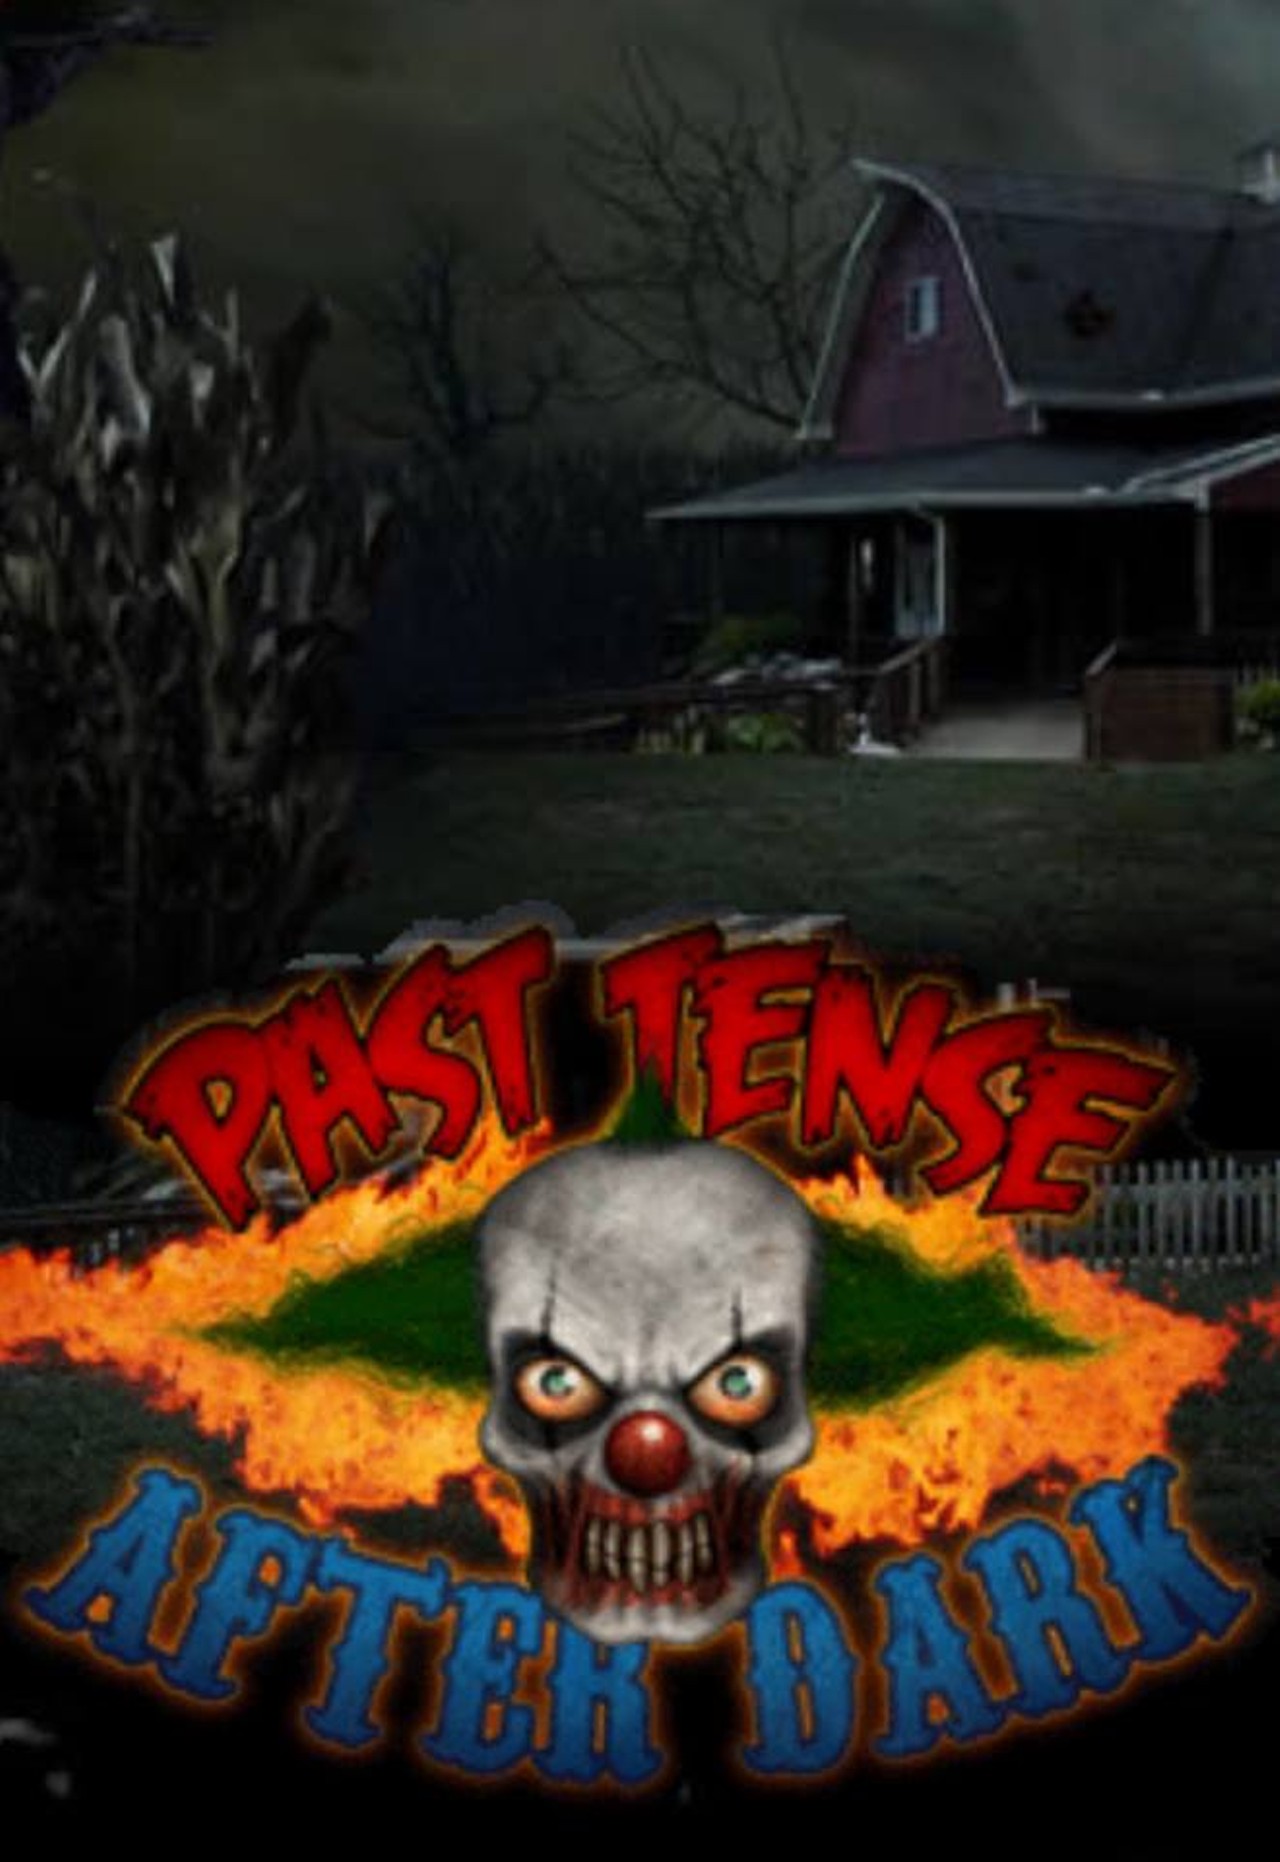 Past Tense After Dark
1965 Farnsworth Rd, Lapeer
810-664-5559
The legend of the Farnsworth Family is the backdrop for this haunted attraction. The figures lurking in the house of horrors and corn maze is a recipe for a terrifying night. Photo courtesy of Facebook